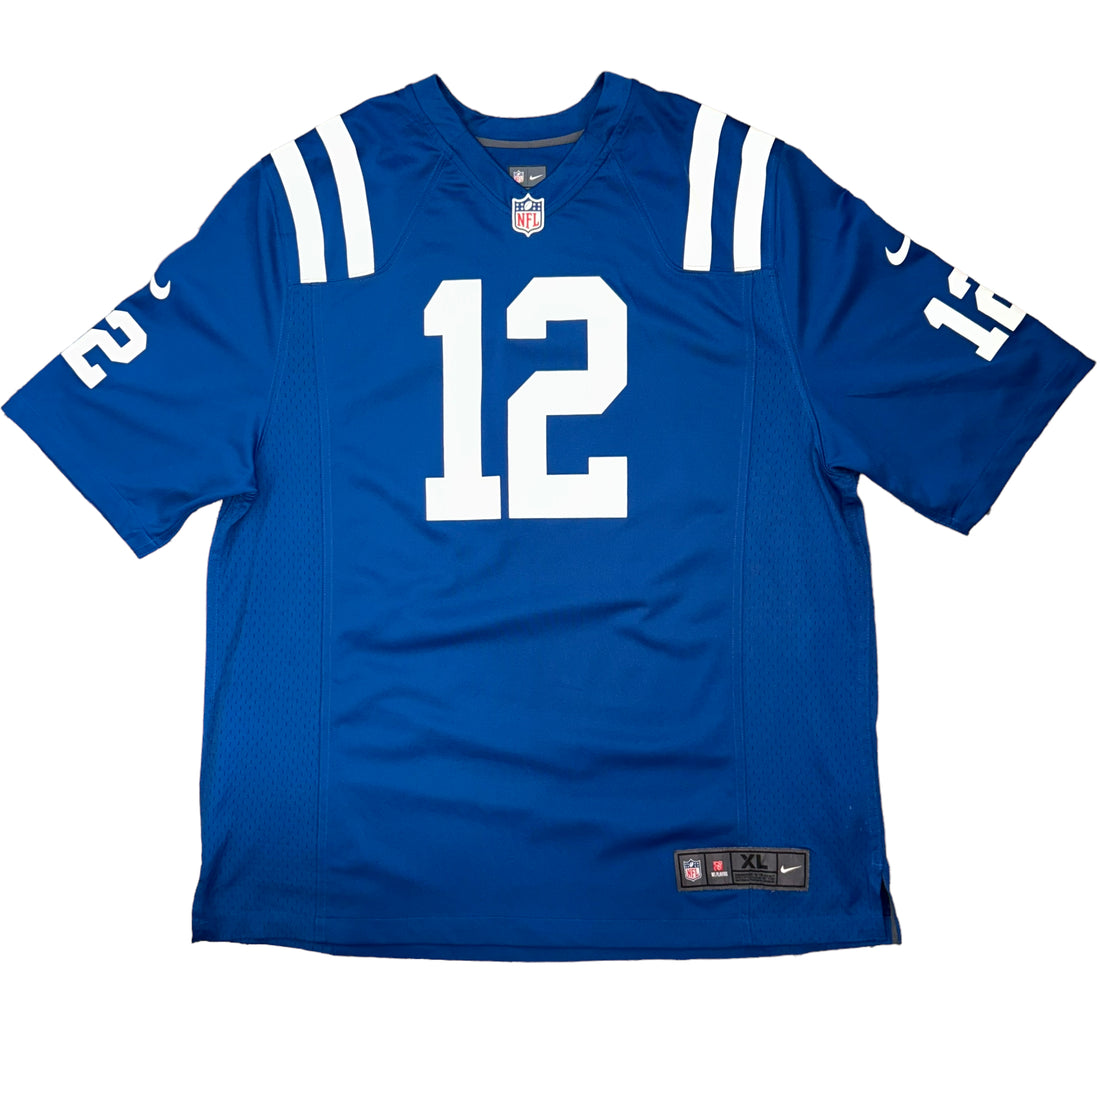 Indianapolis Colts Jersey NFL NIKE (XL)